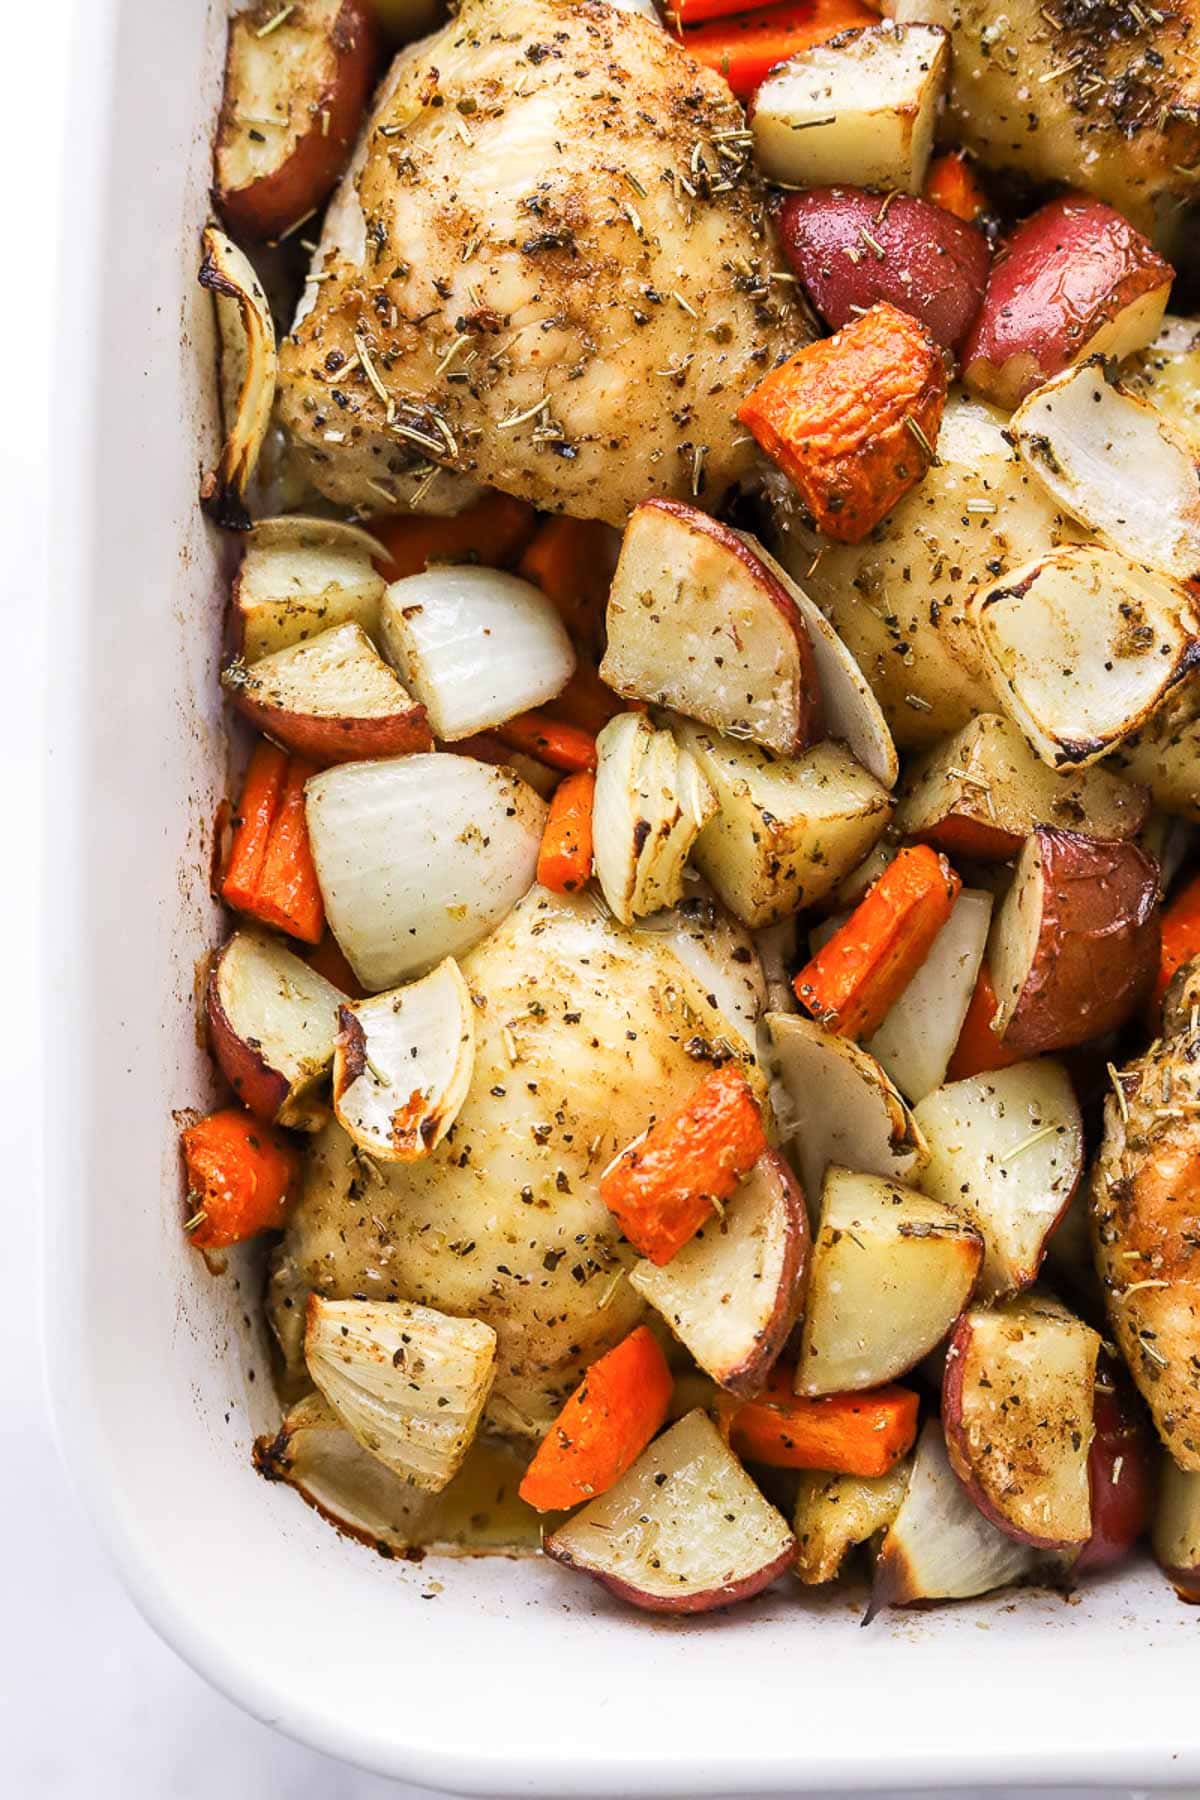 Roasted chicken thighs and potatoes in baking dish.